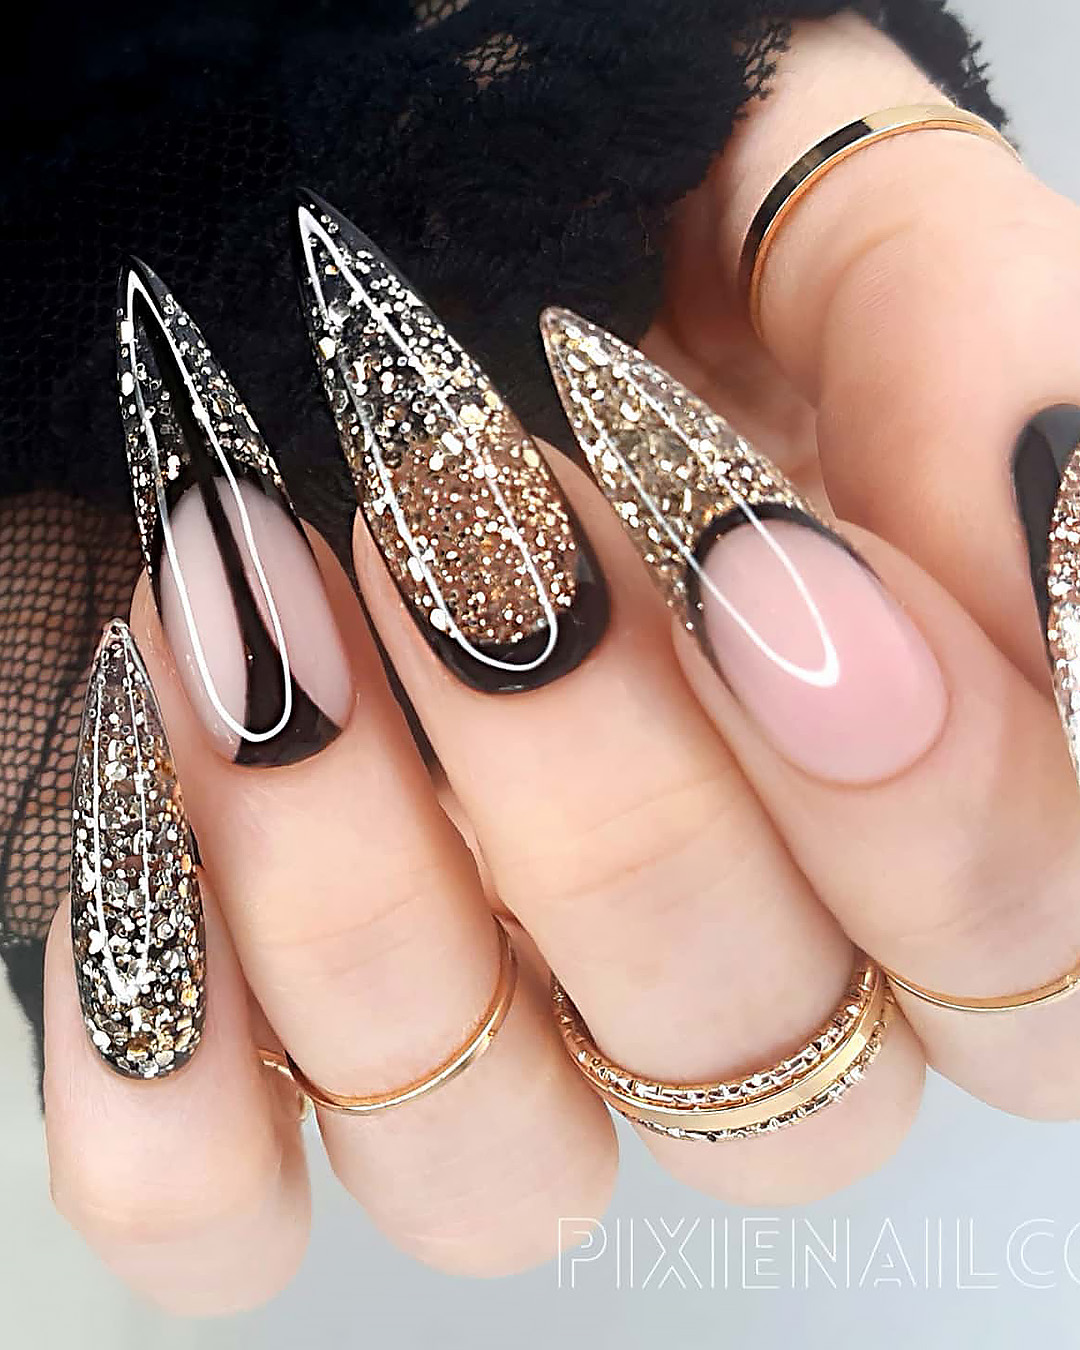 black and gold wedding nails long with glitter pixienailco - Black and Gold Wedding Nail Designs